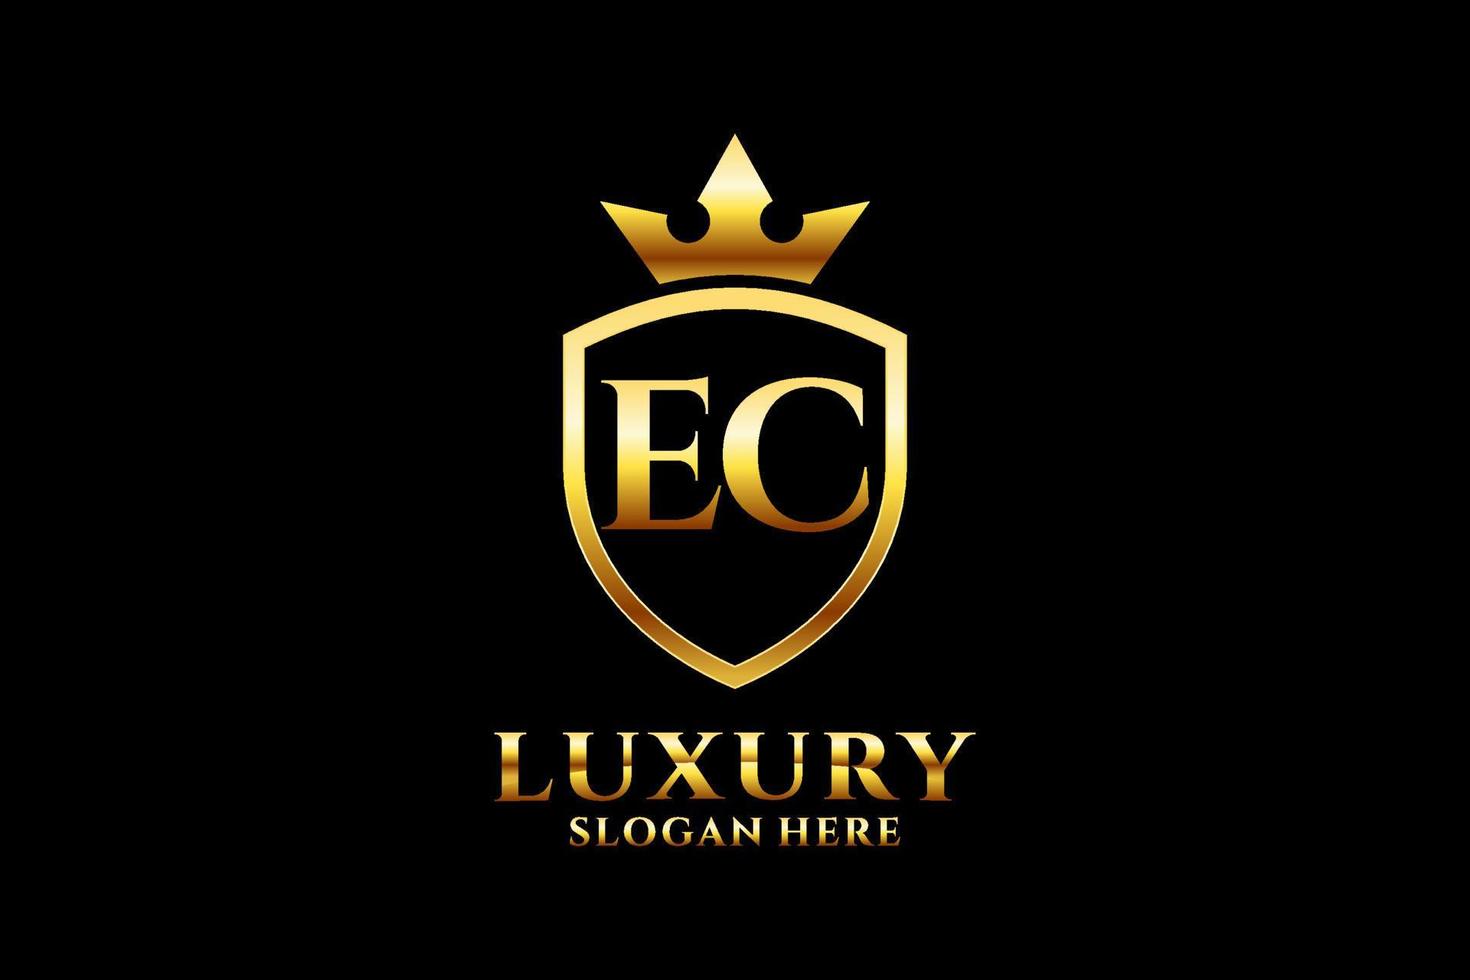 initial EC elegant luxury monogram logo or badge template with scrolls and royal crown - perfect for luxurious branding projects vector